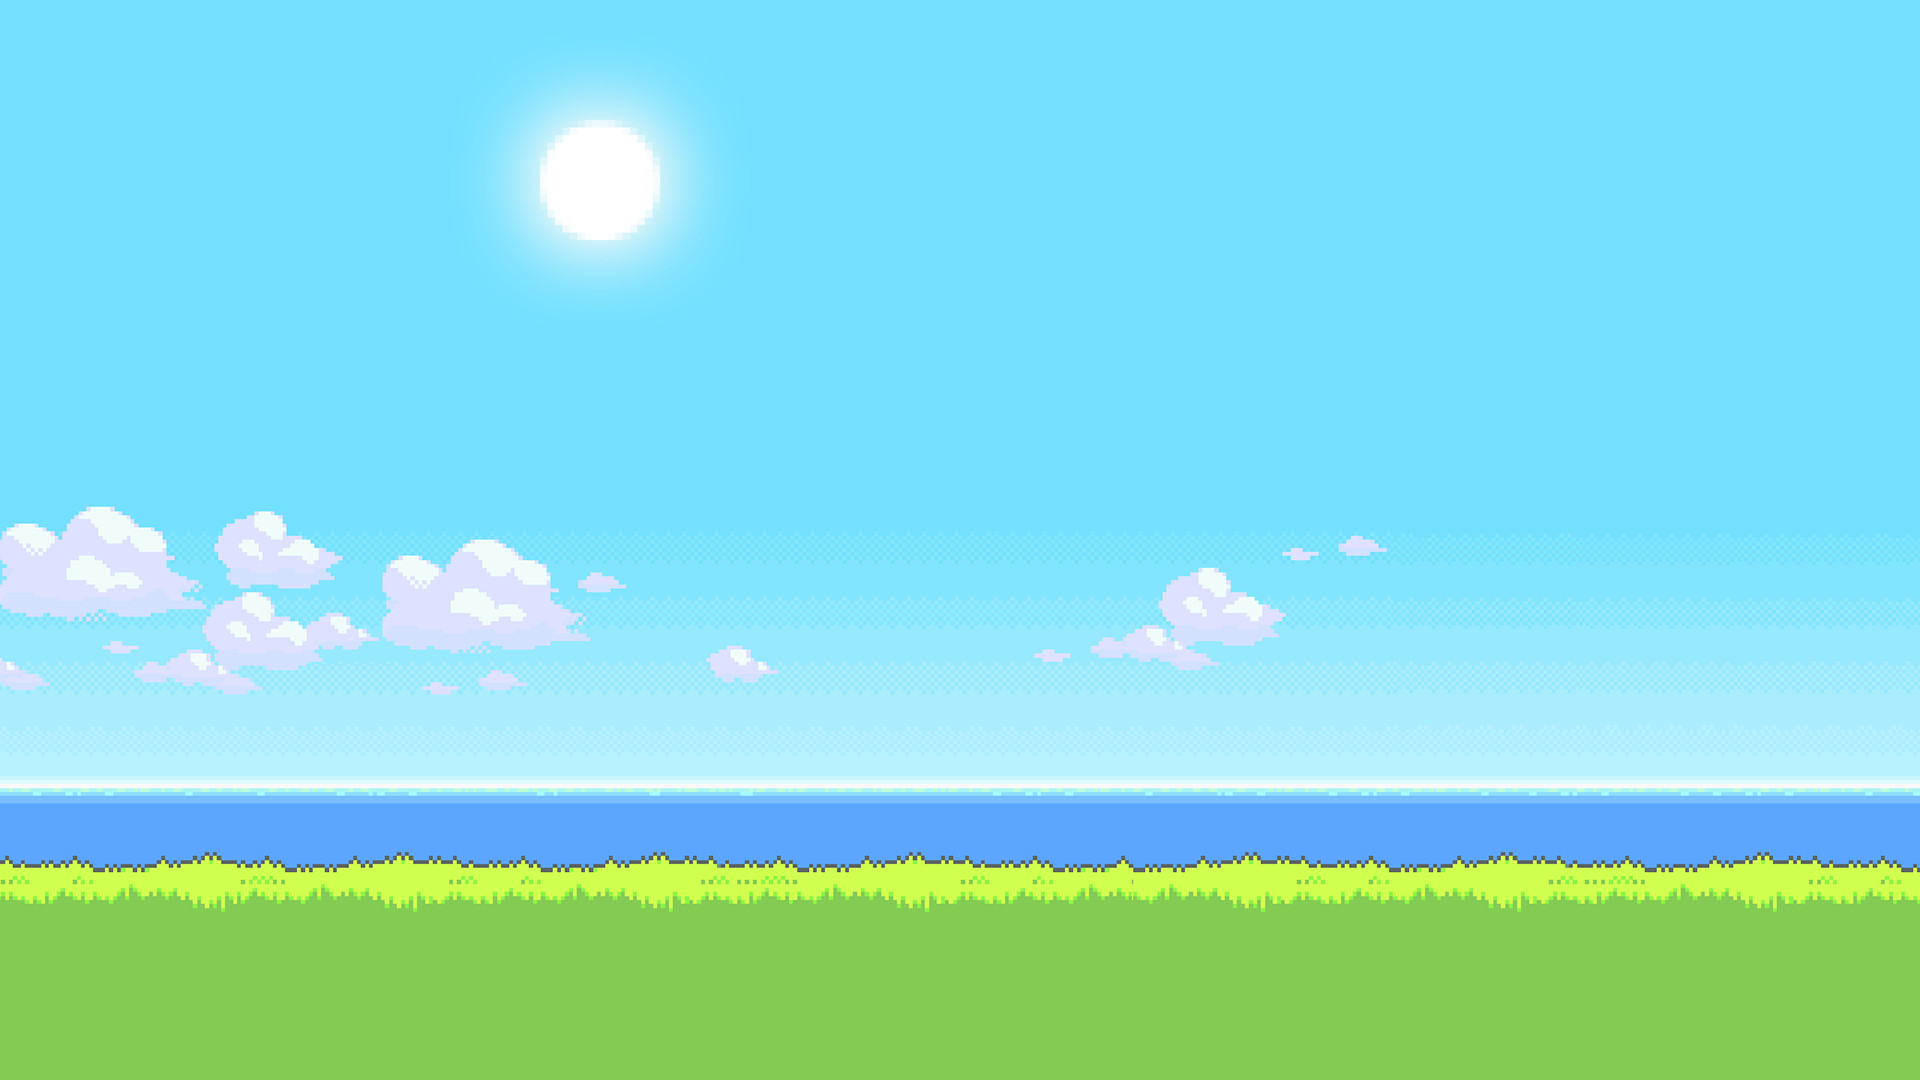 UPDATE New version of the 8Bit Day Wallpaper Set. Pixel wallpaper changes based on time of day